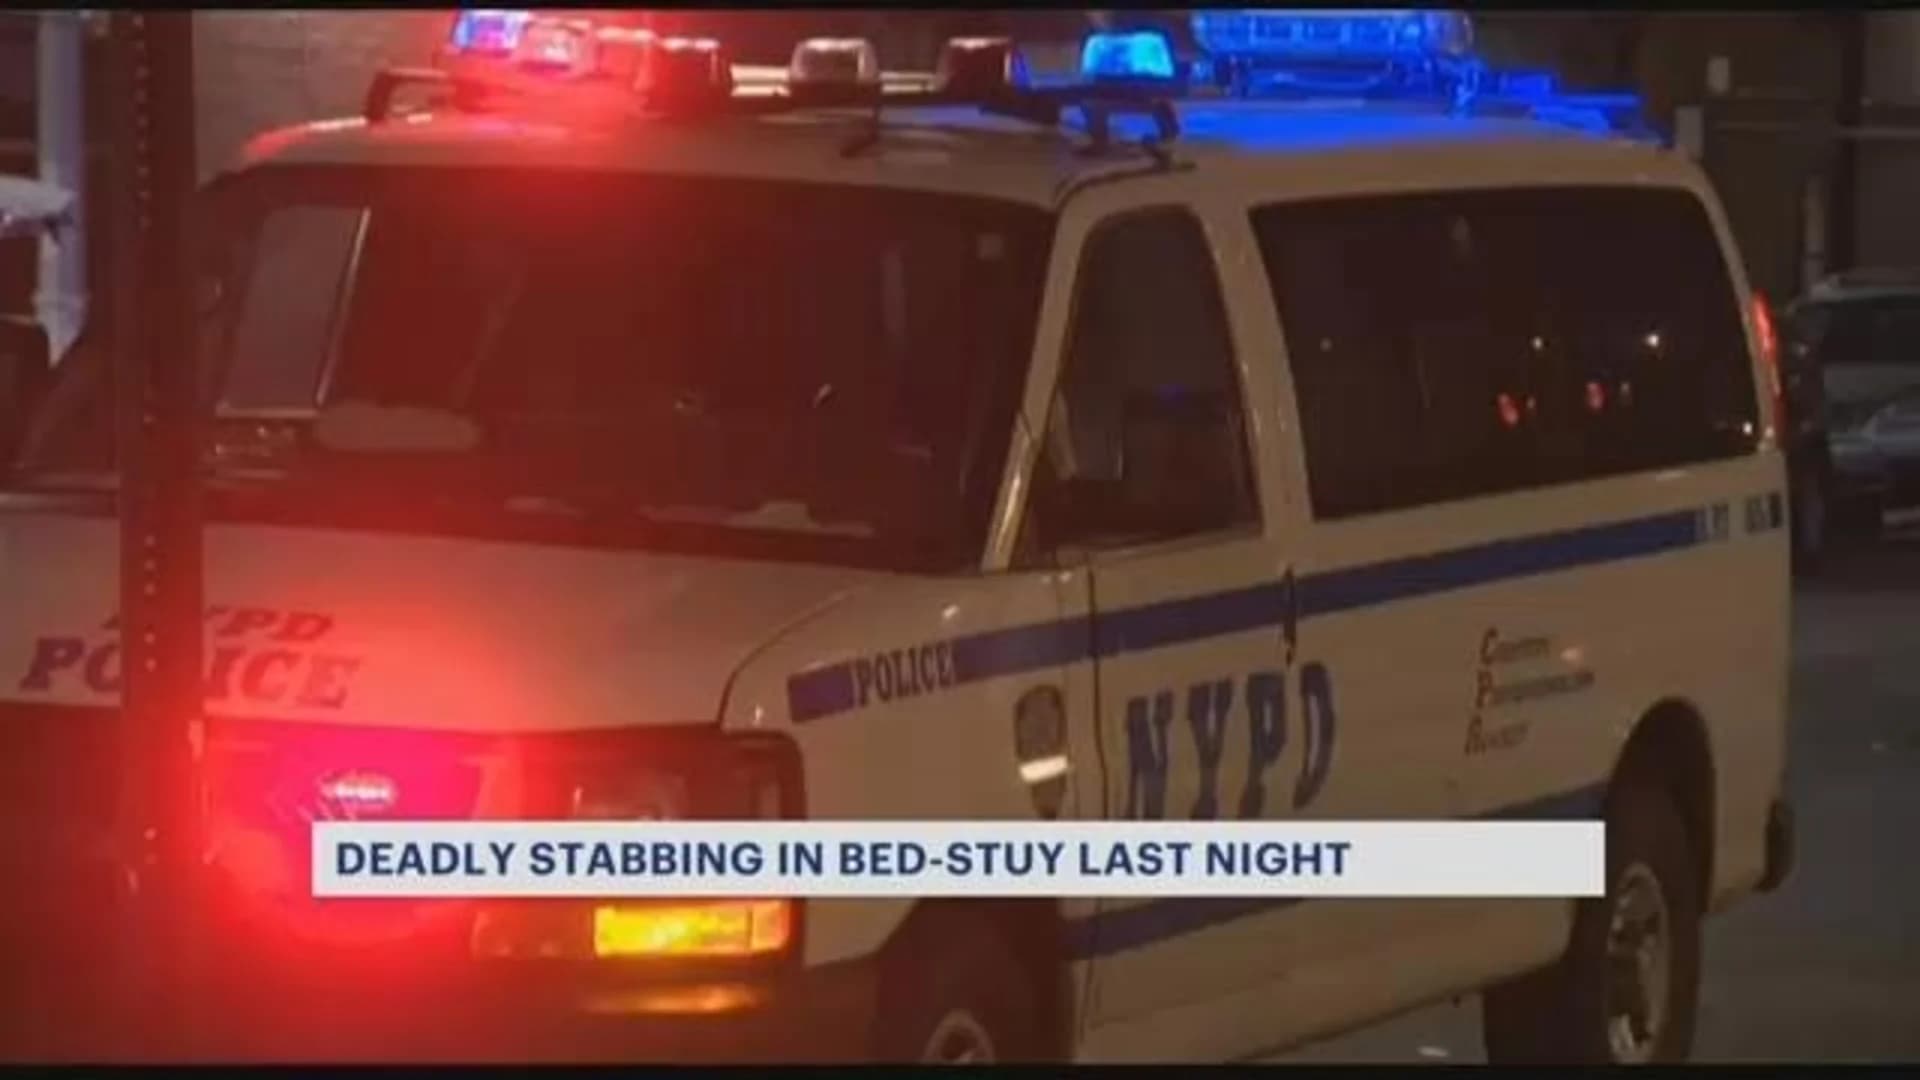 Police: 2 men wanted for fatal stabbing of 31-year-old in Bed-Stuy